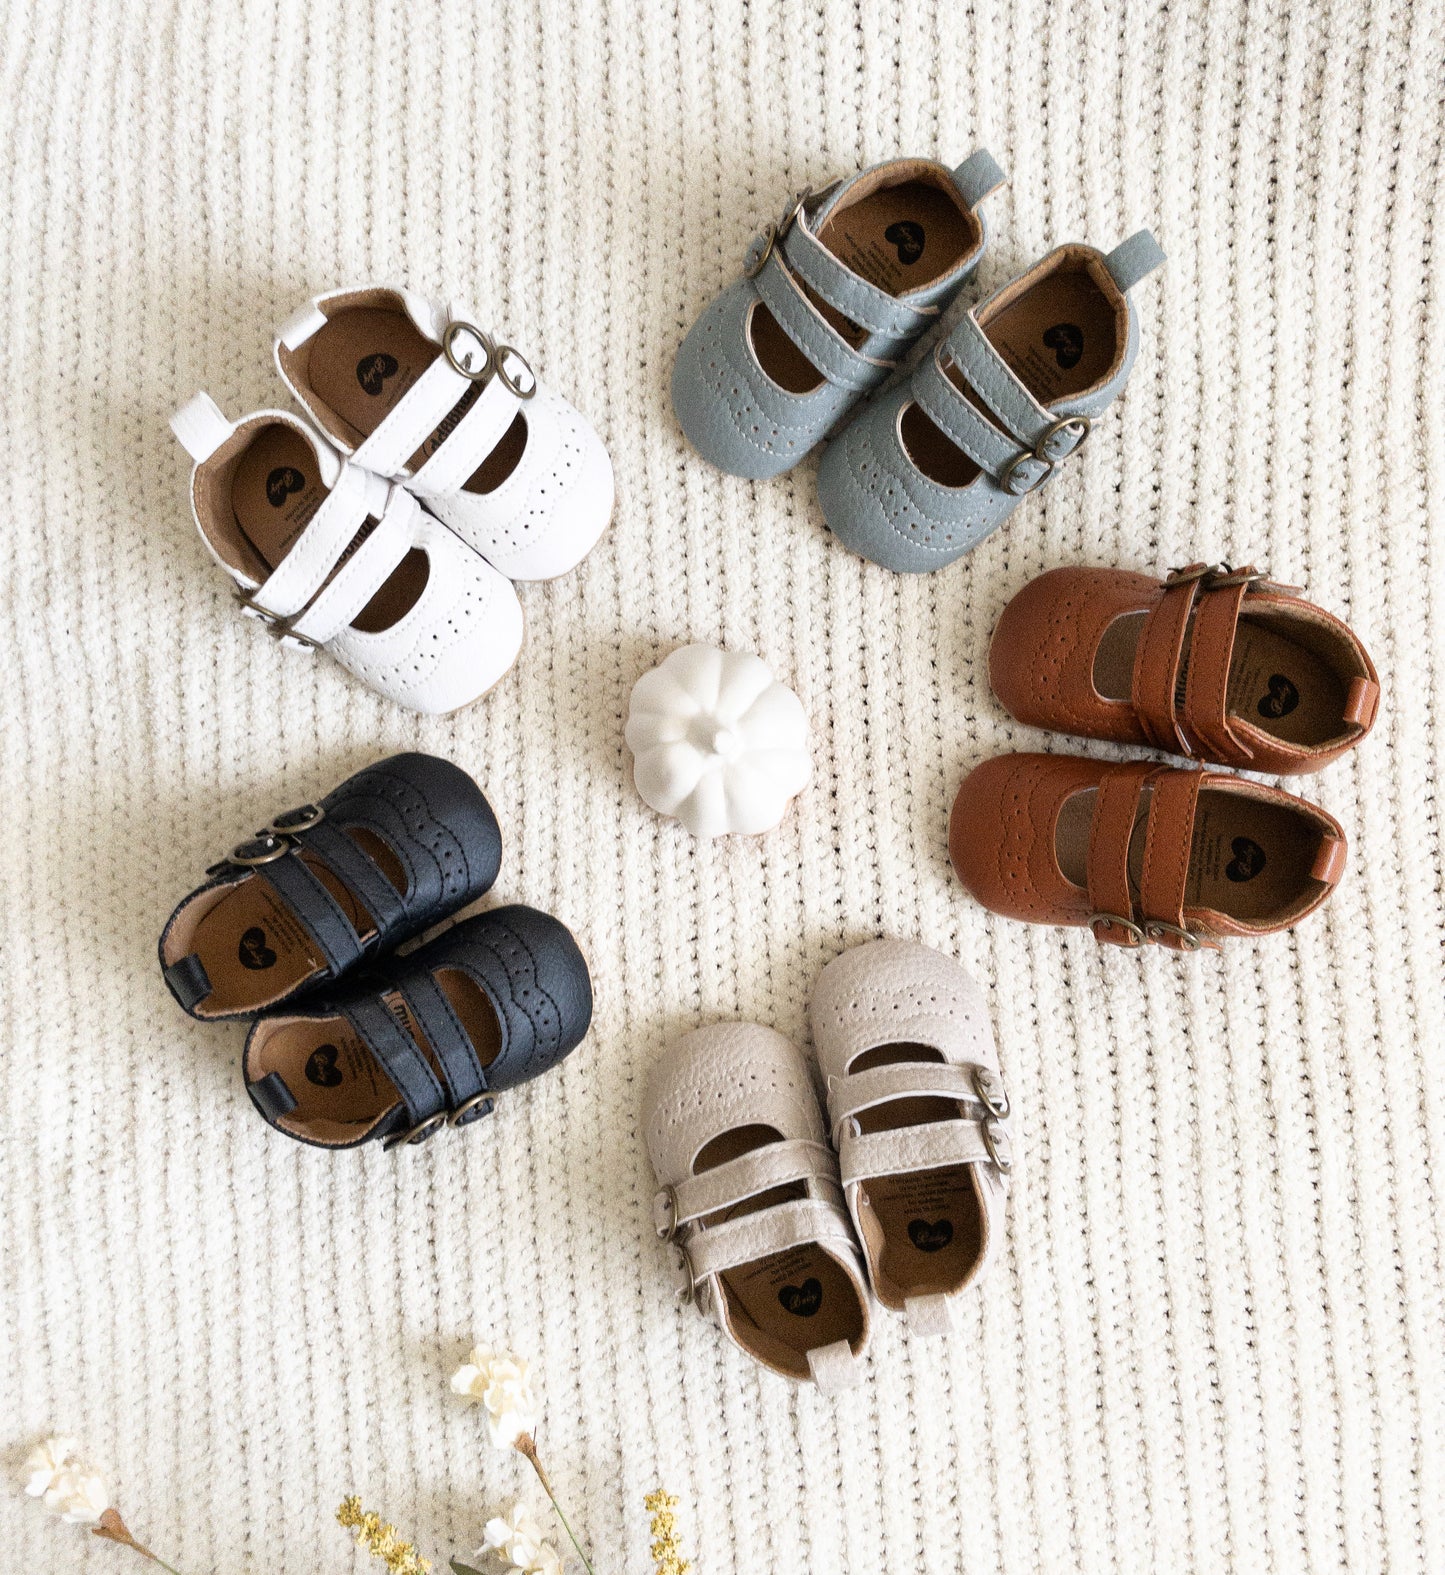 Double Strap Baby Shoes | 5 colors